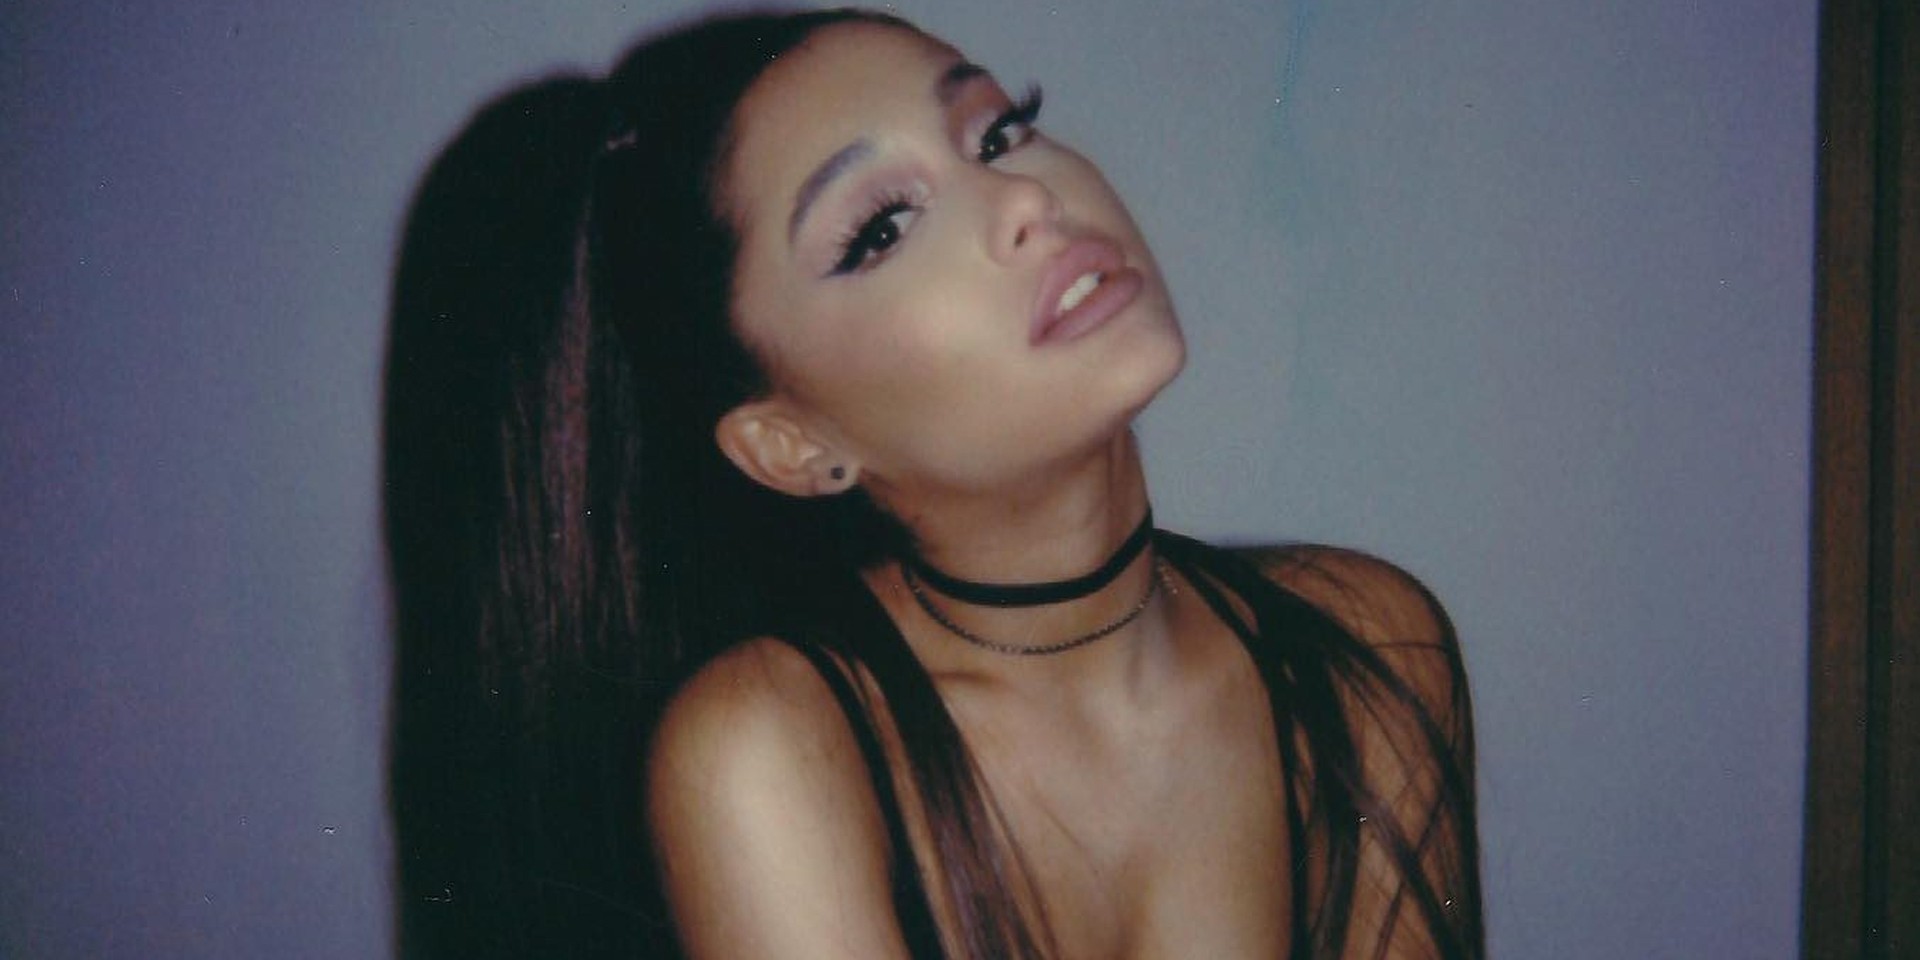 Ariana Grande's behind the scenes teaser hits over 1.7 million views in 2 hours – watch